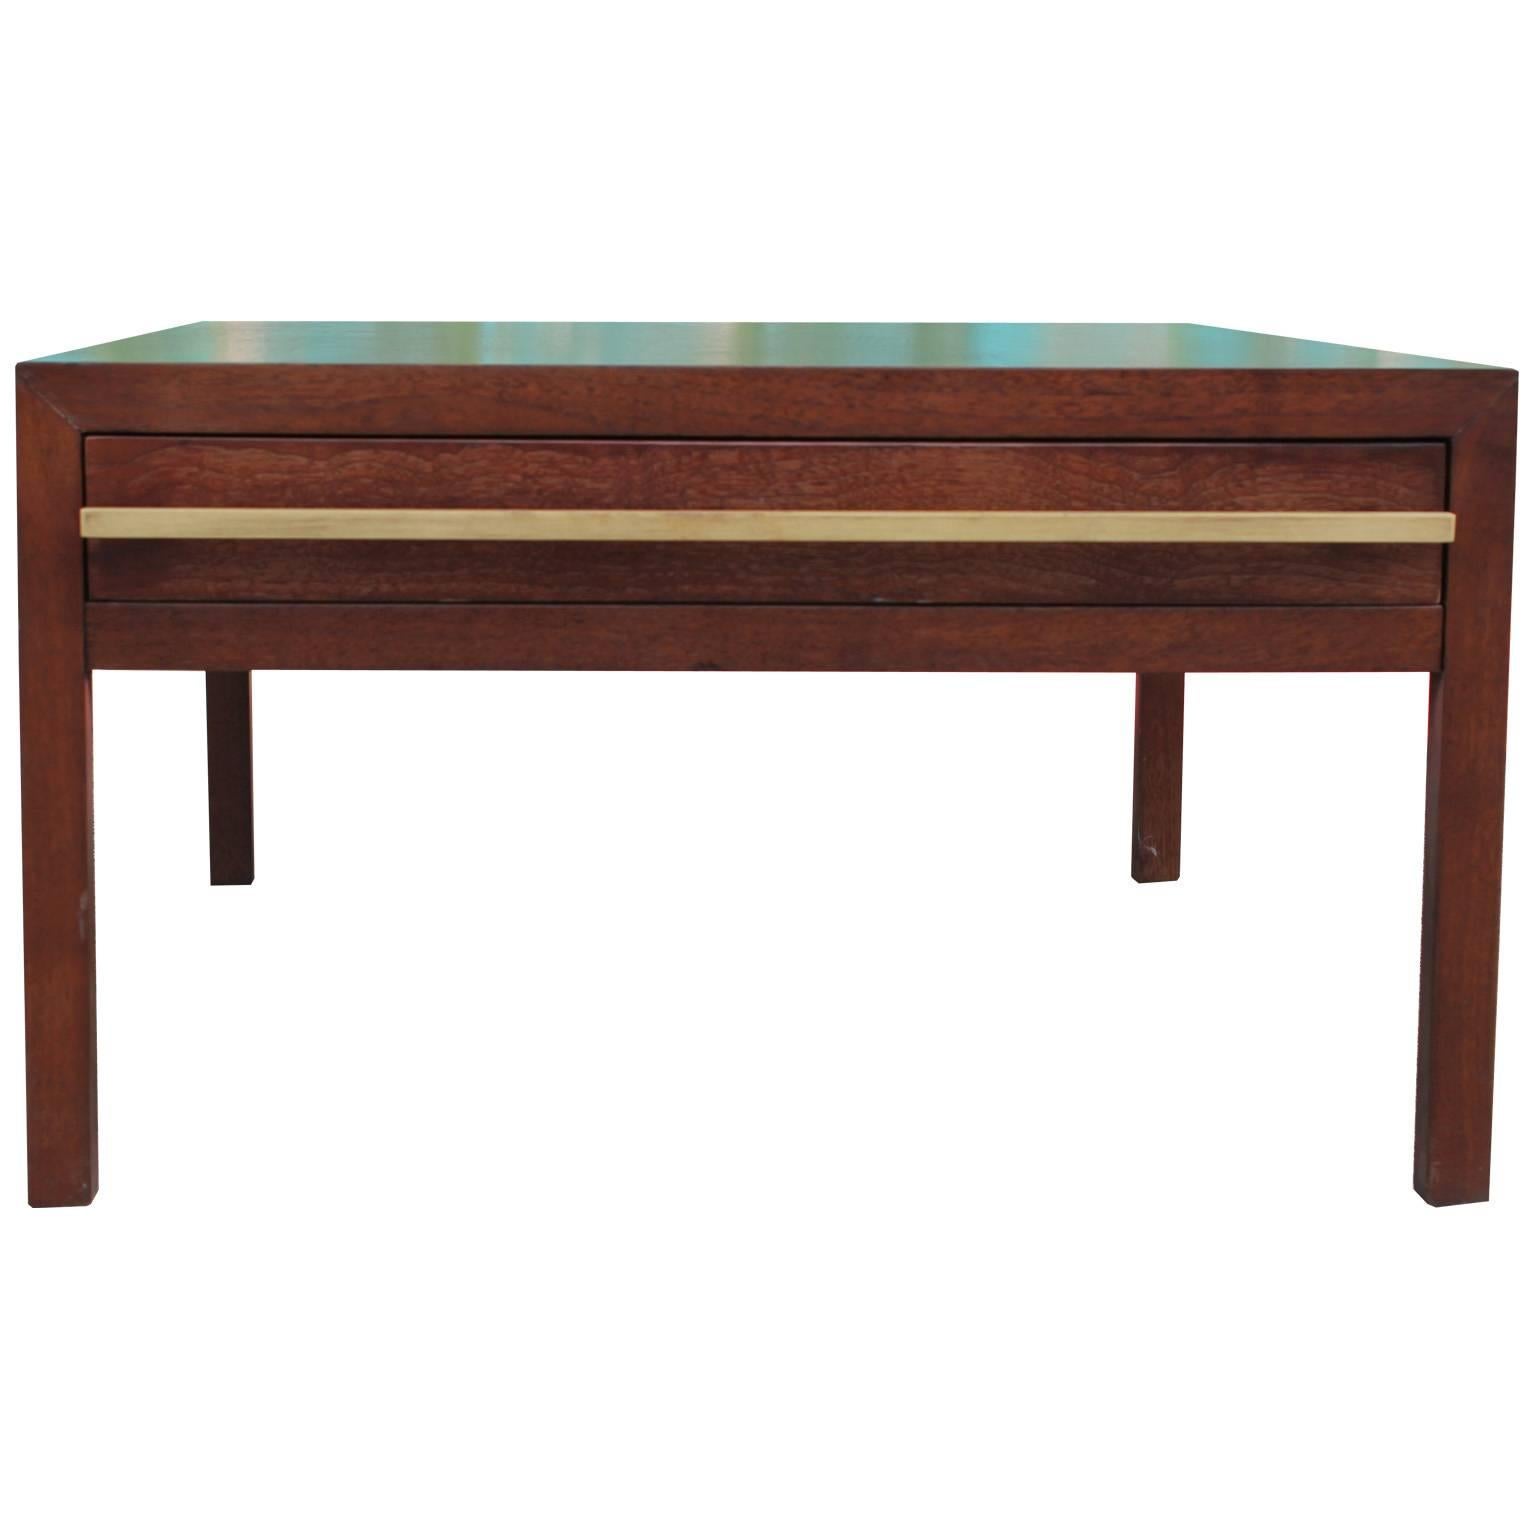 Excellent coffee table or occasional table by Michael Taylor for Baker. Table has simple clean lines. A single drawer provides storage. Dramatic brass hardware adds visual interest.